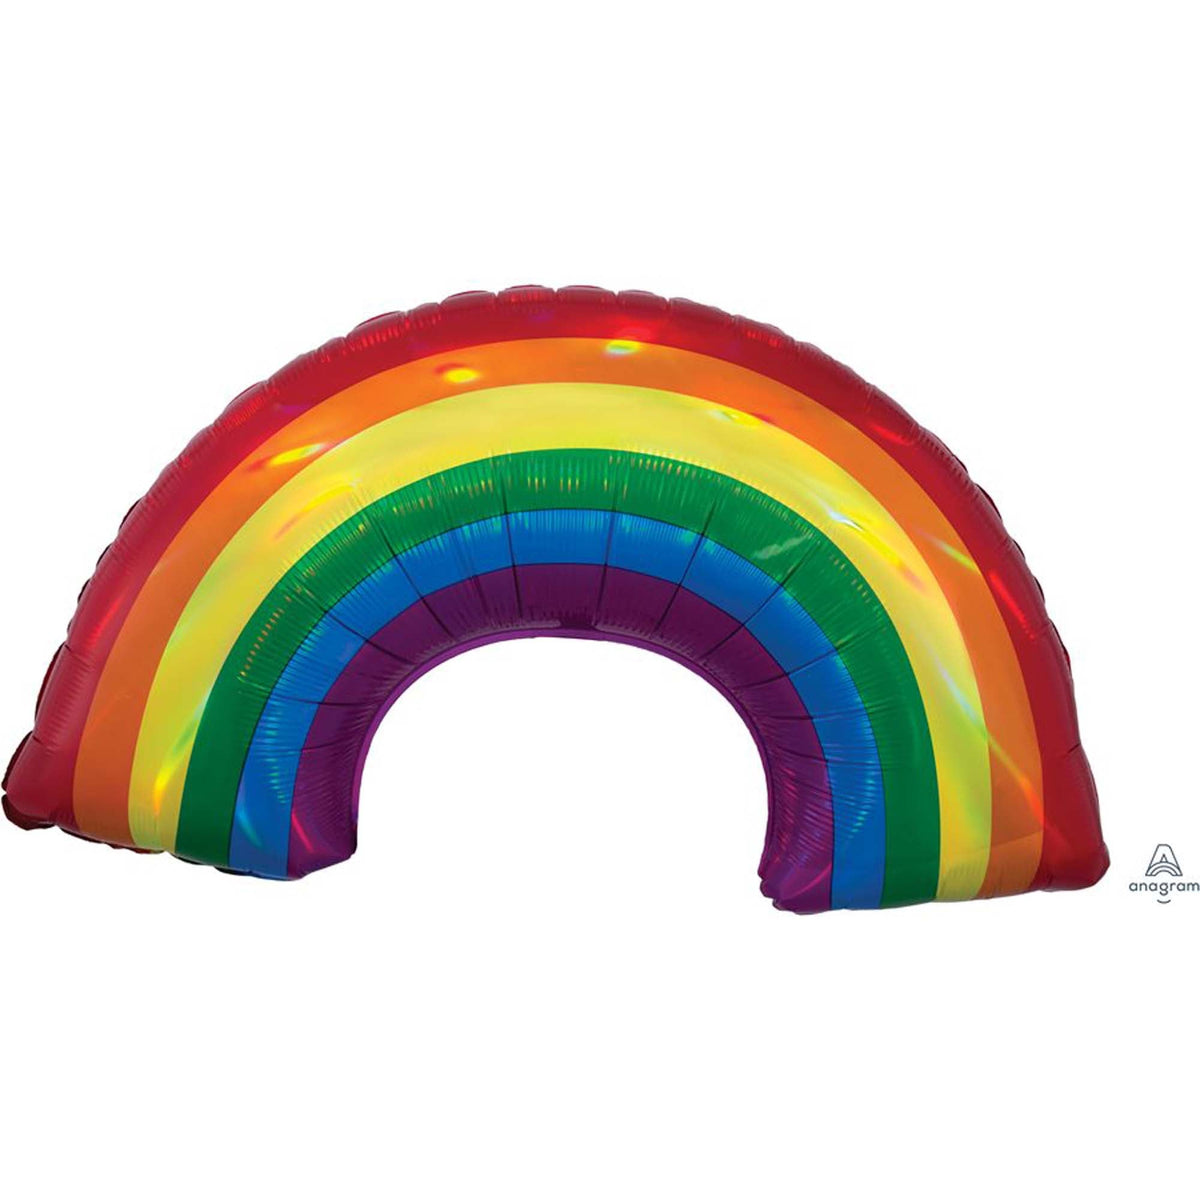 LE GROUPE BLC INTL INC Balloons Iridescent Rainbow Supershape Balloon, 34 Inches, 1 Count